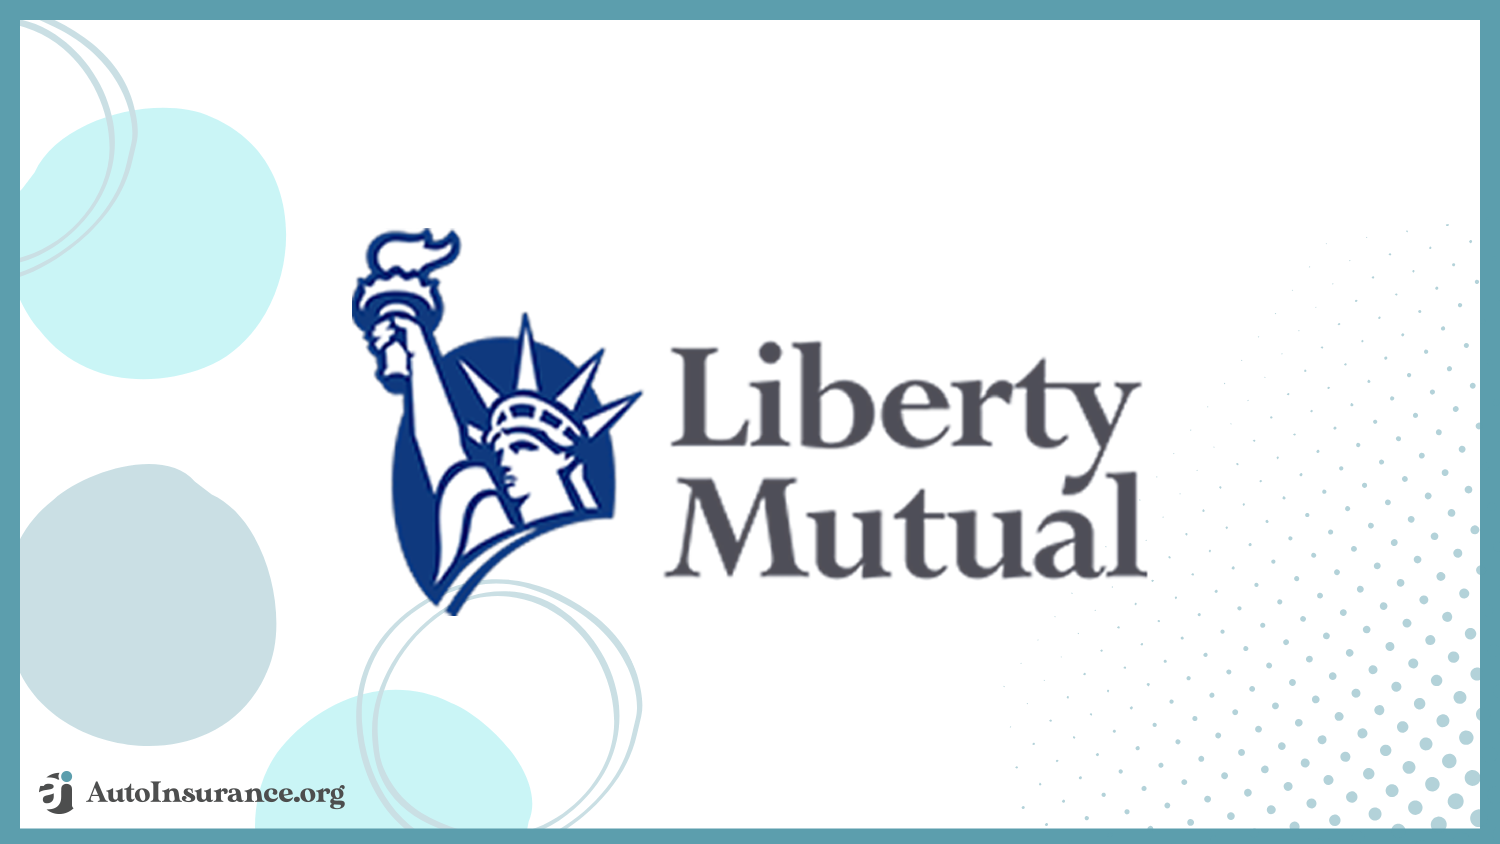 Liberty mutual Best Auto Insurance for Firefighters